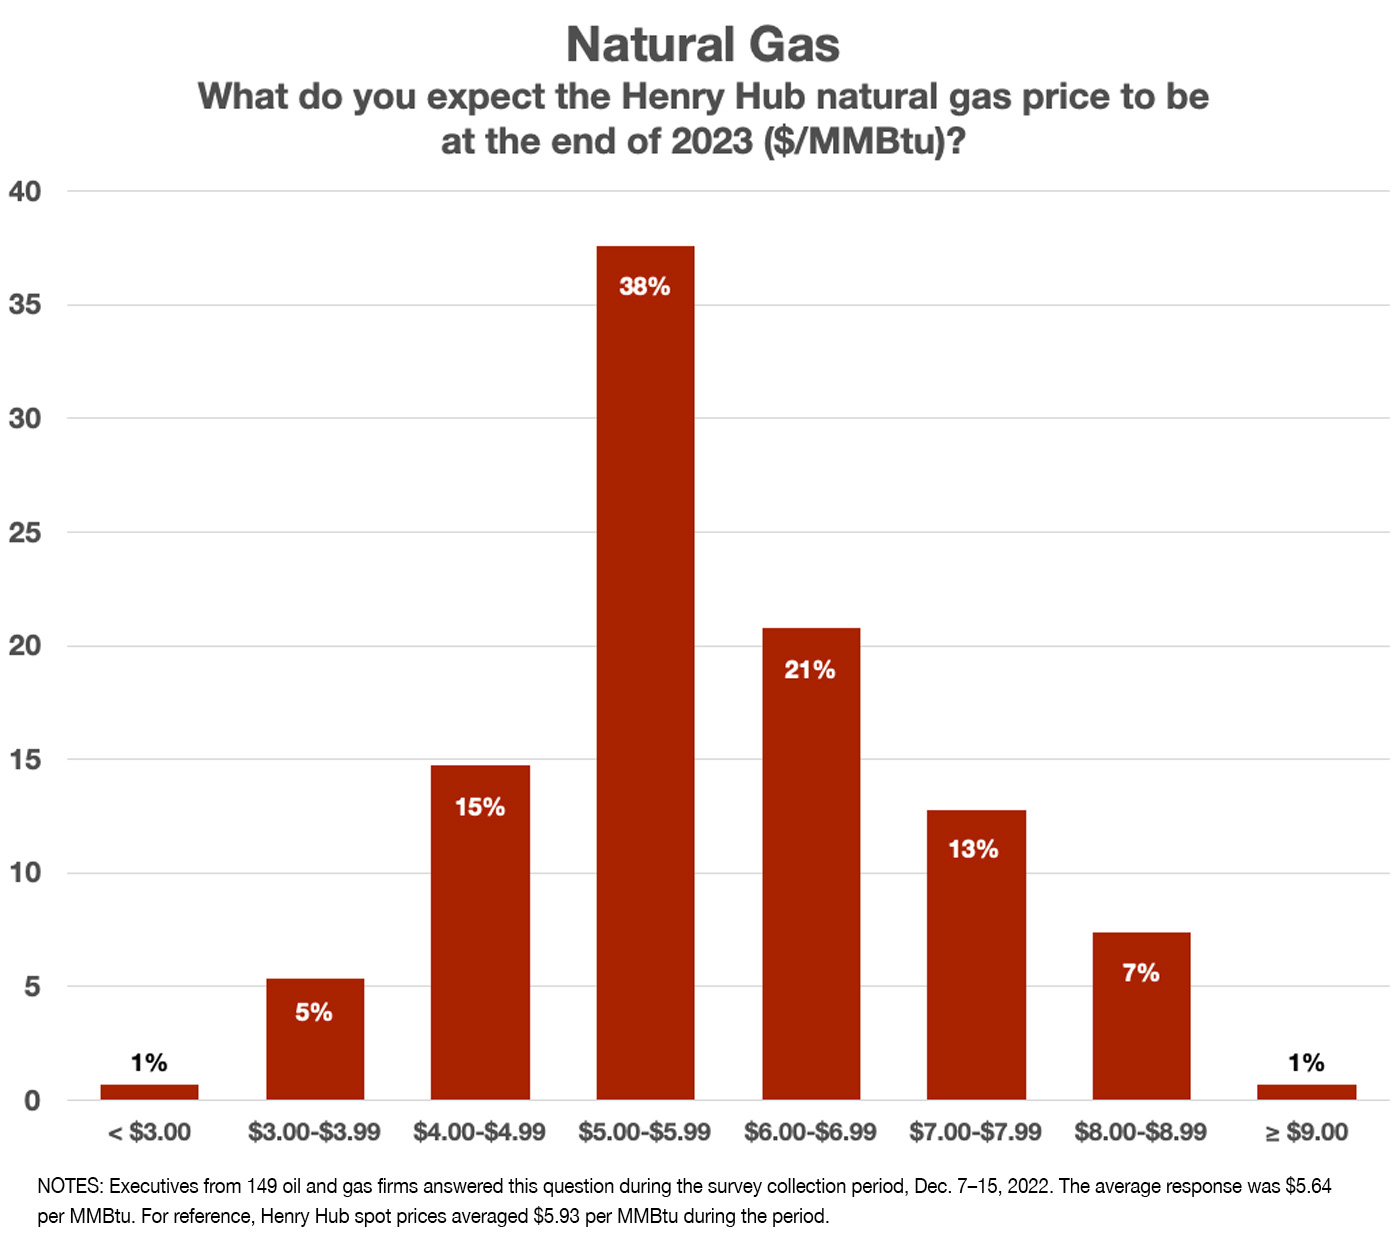 Expected Natural Gas Prices